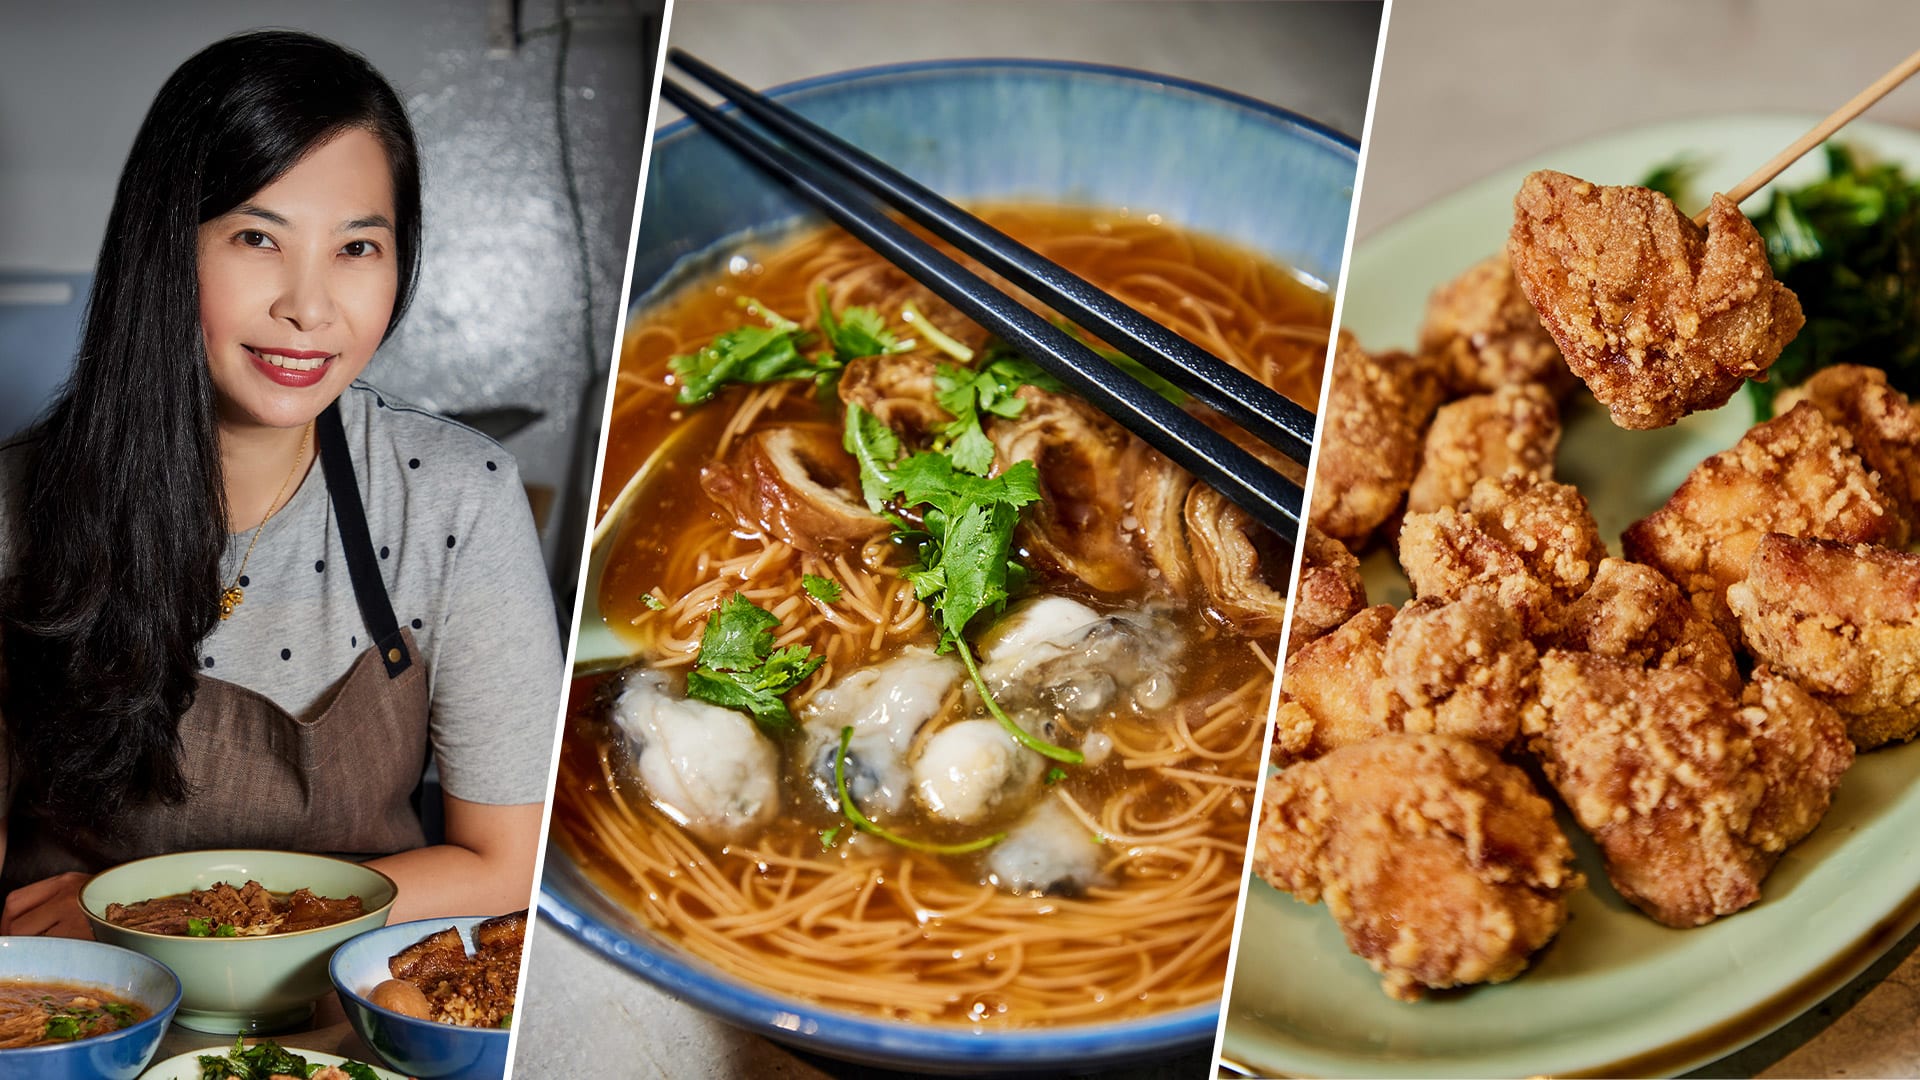 She serves Taiwanese street food classics from $7.90 at her cosy Chinatown restaurant.